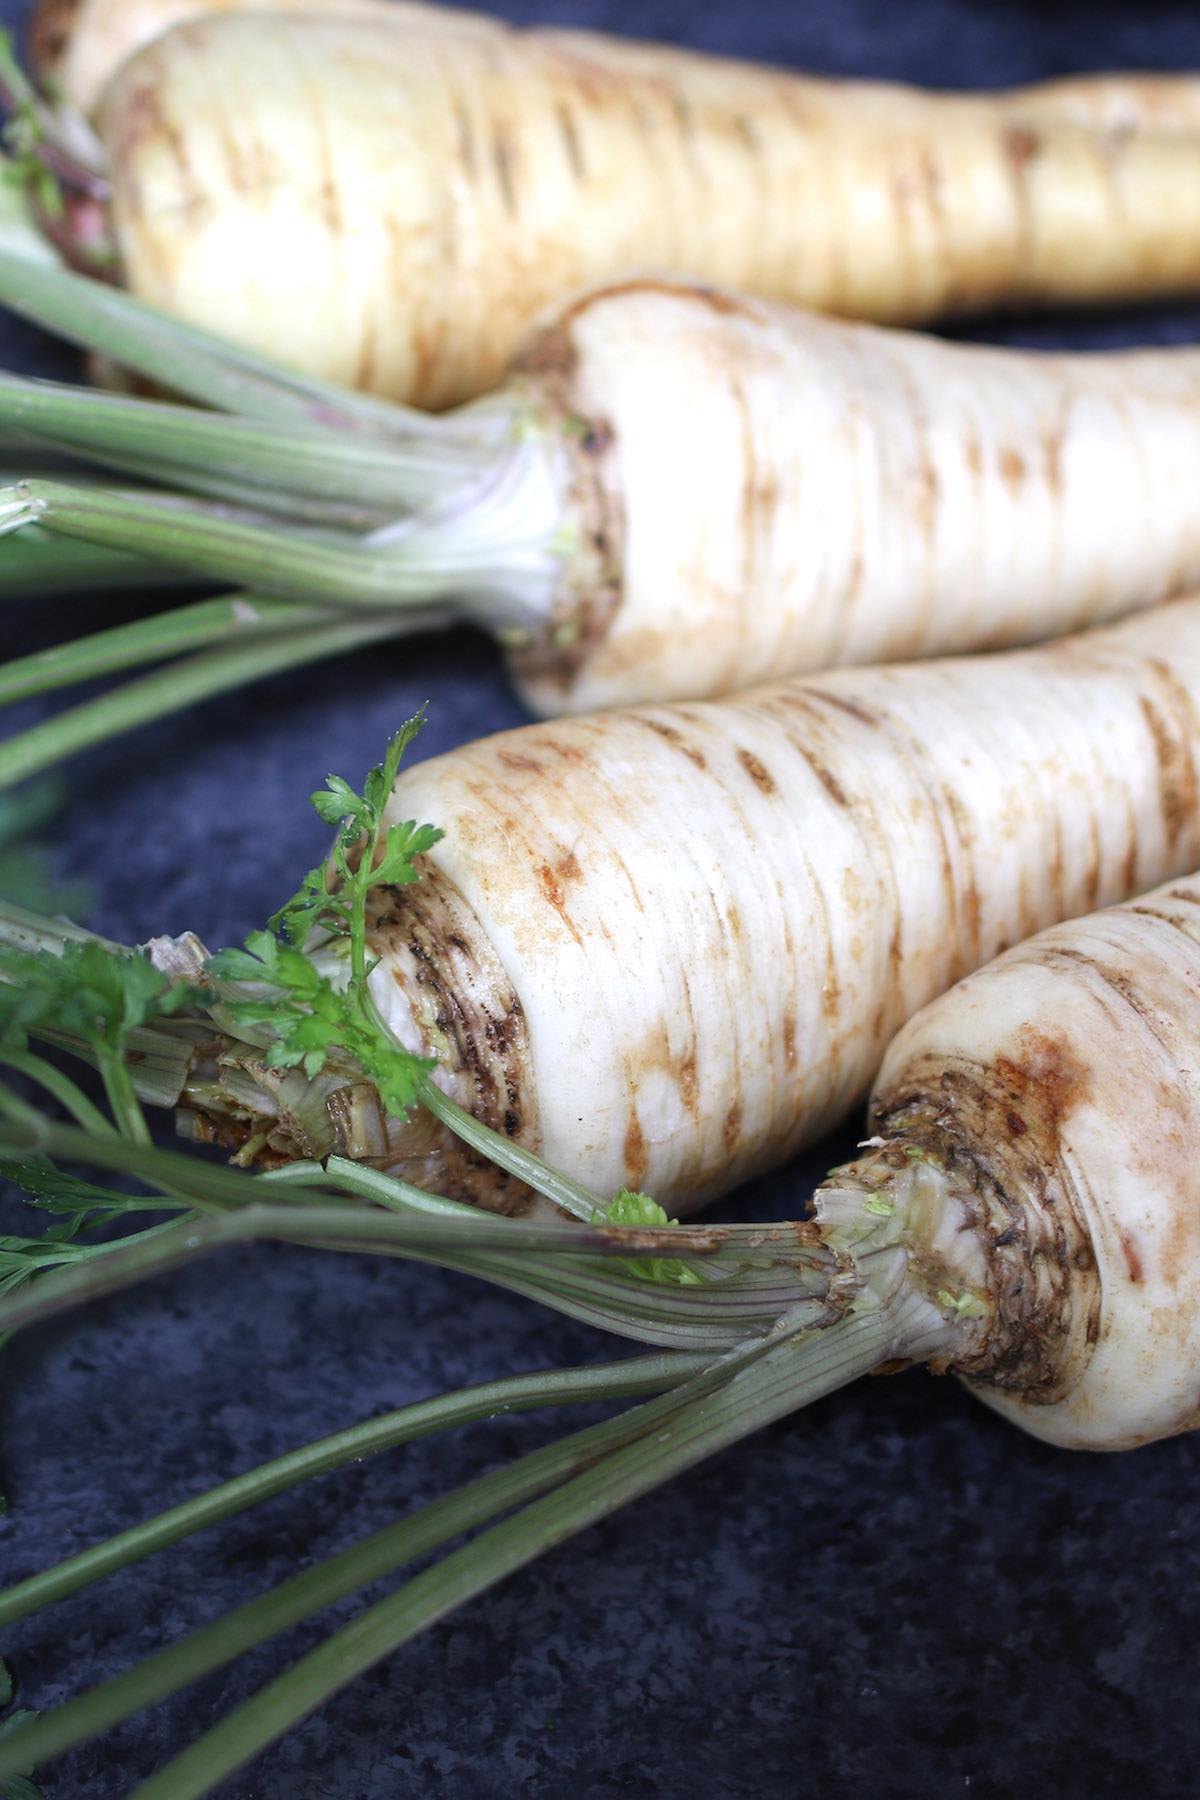 Fresh raw parsnips with white skin and intact tops